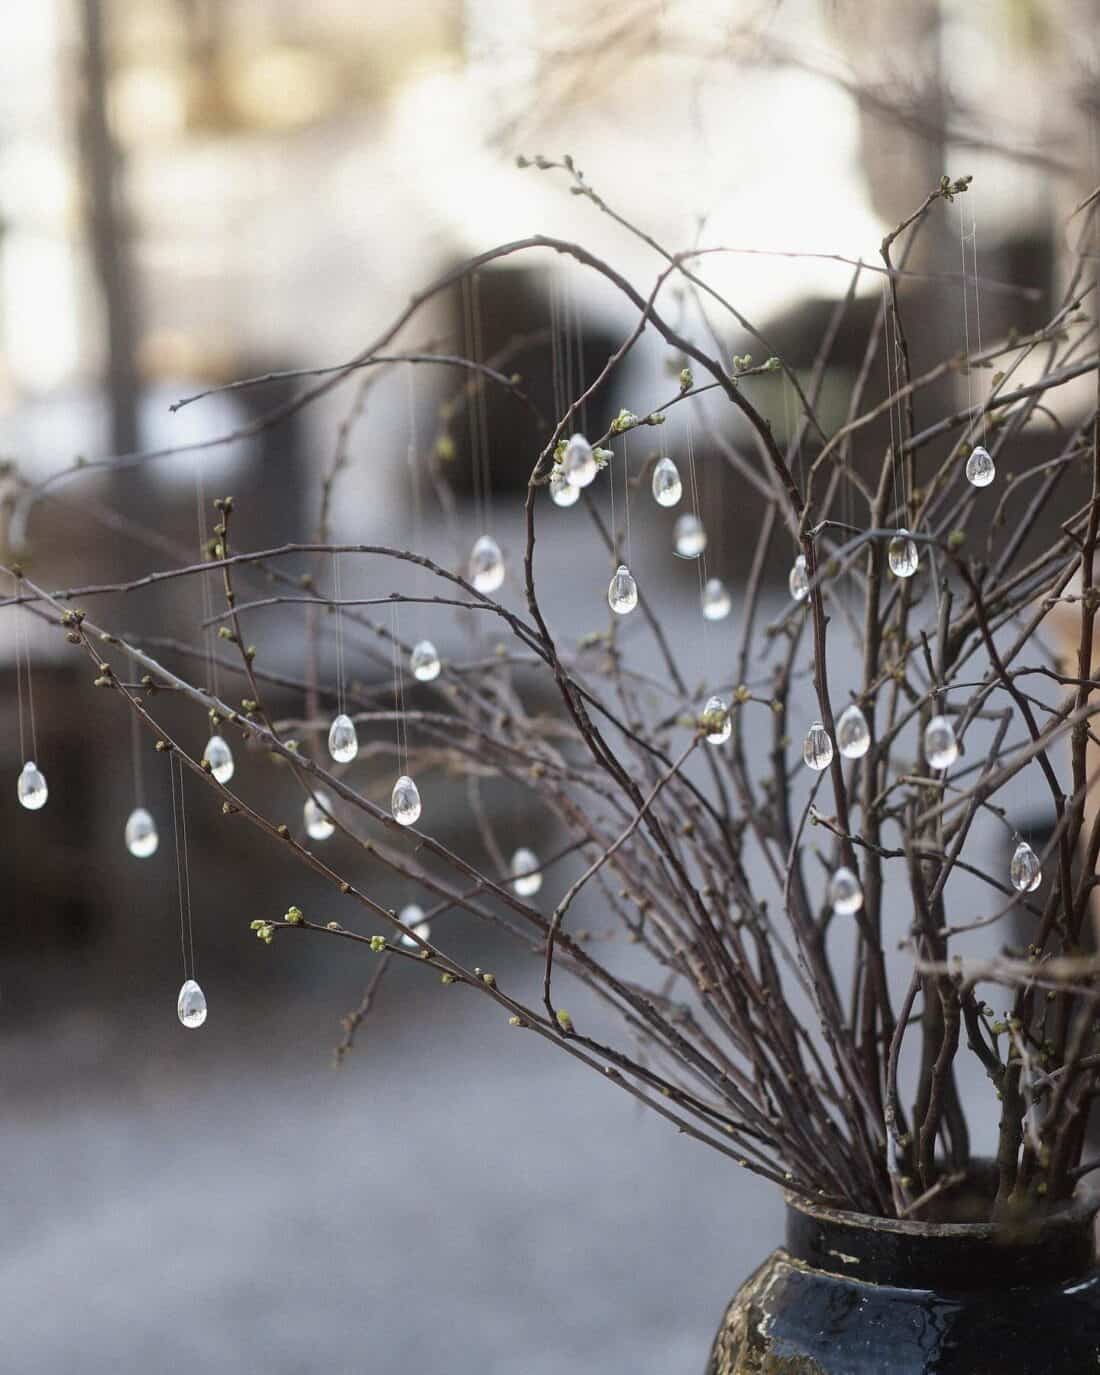 Bare twigs in a vase adorned with hanging clear glass beads, with a blurred background.